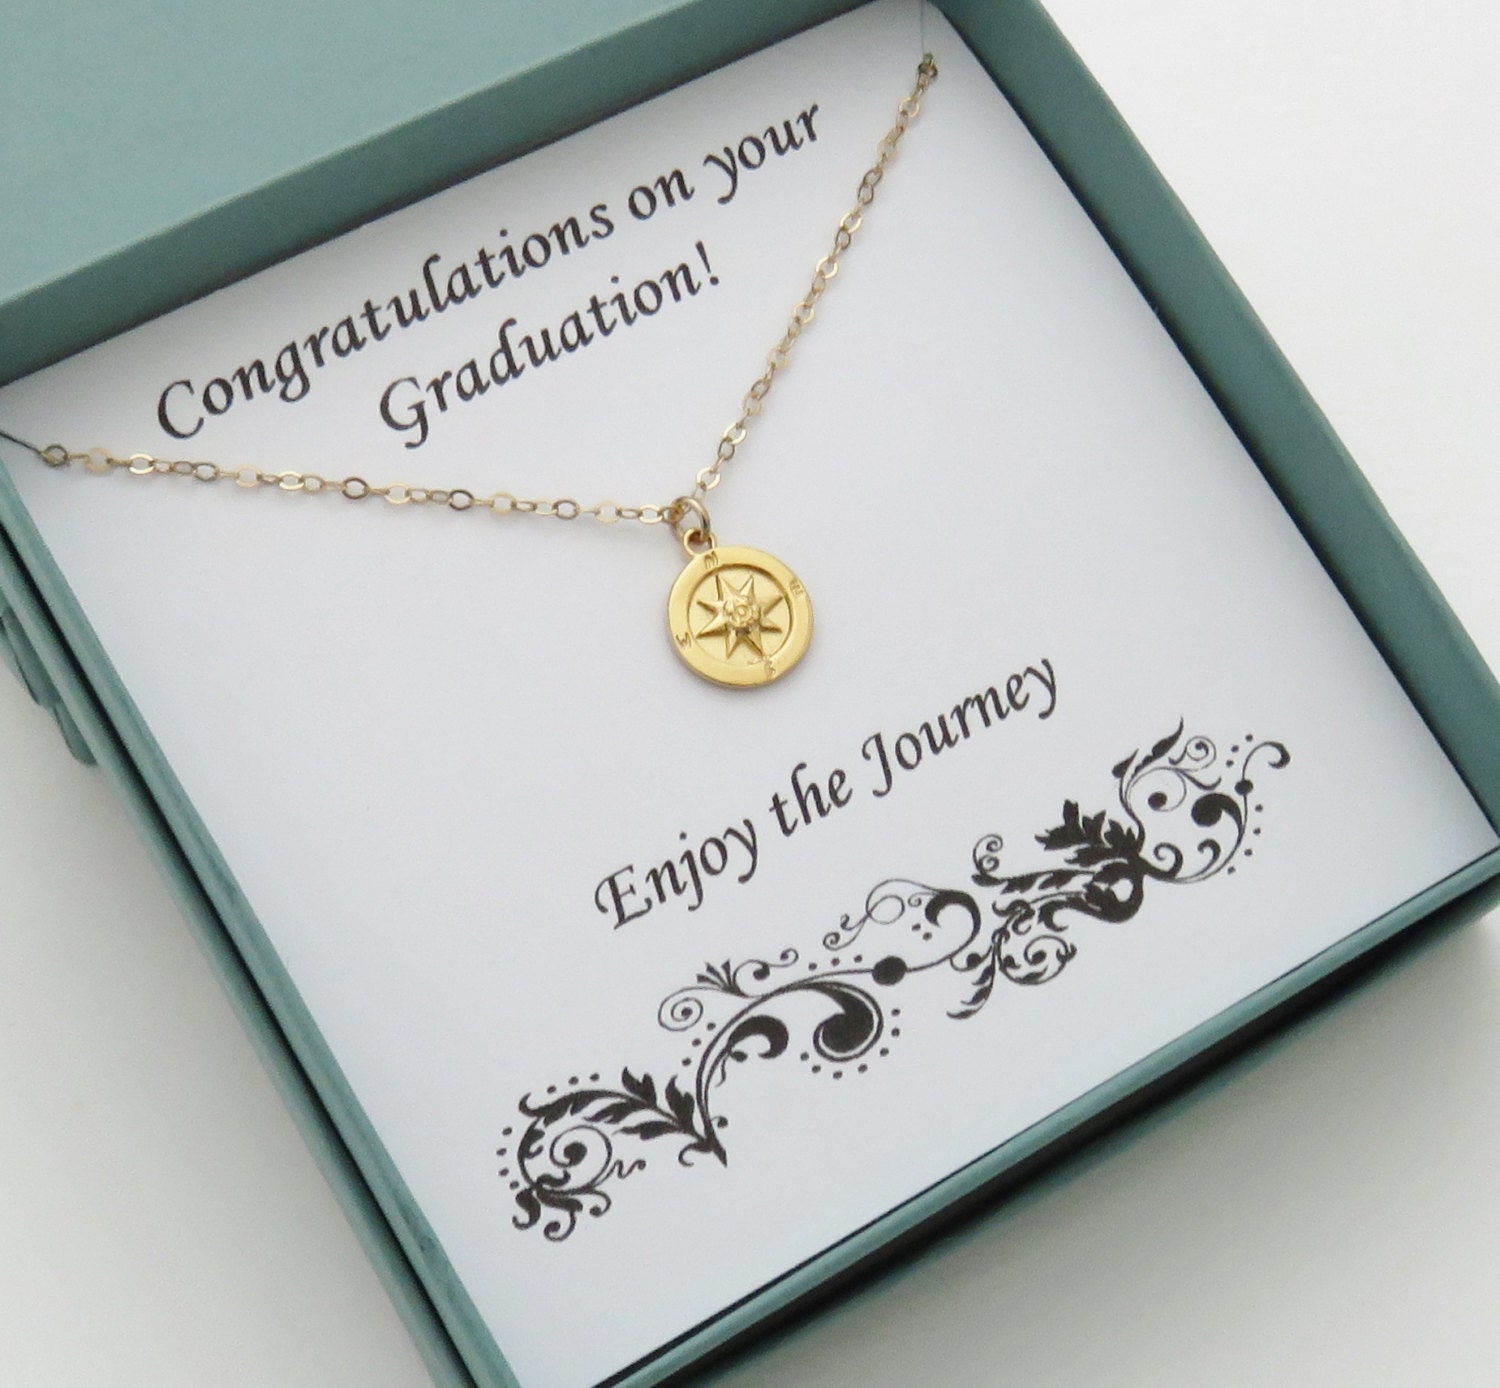 Graduation Necklace, Graduation Gifts for Her, Gift Ideas for Graduation,  Personalised Necklace, Diploma Gifts, Graduation Jewelry, Graduate - Etsy  Denmark